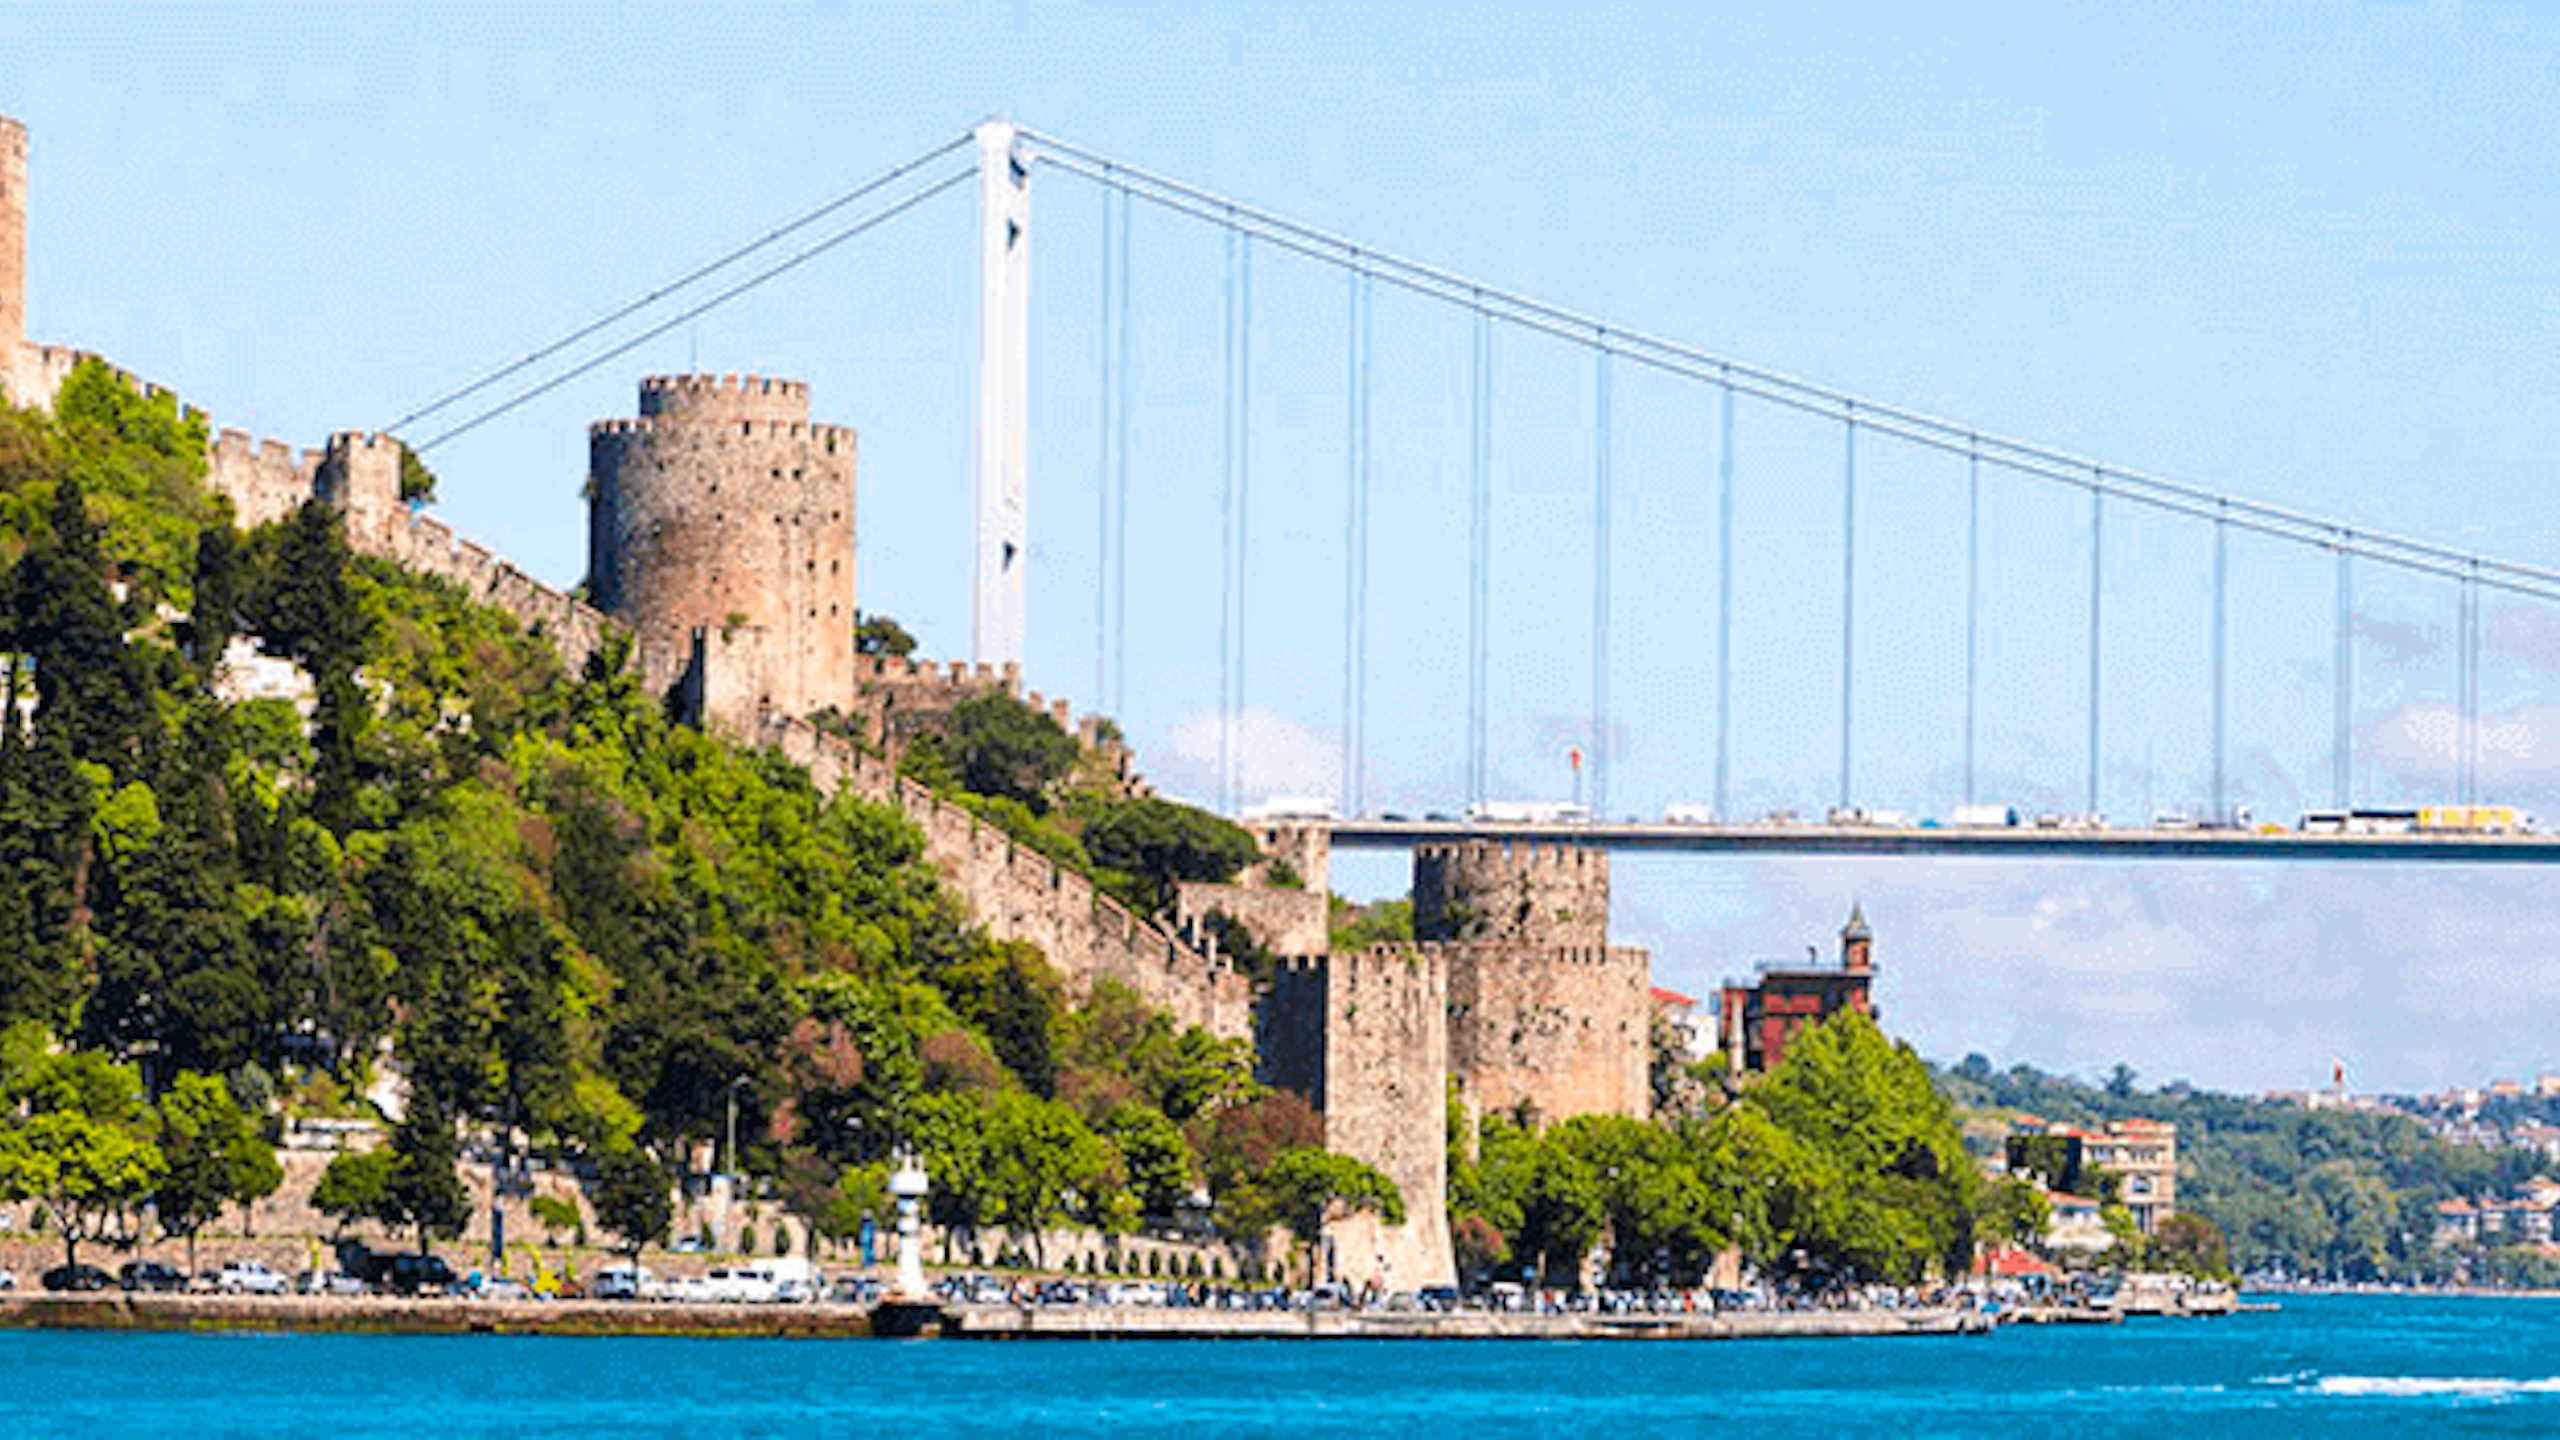 Bosphorus Cruise with Asian Side & Dolmabahce Palace Location